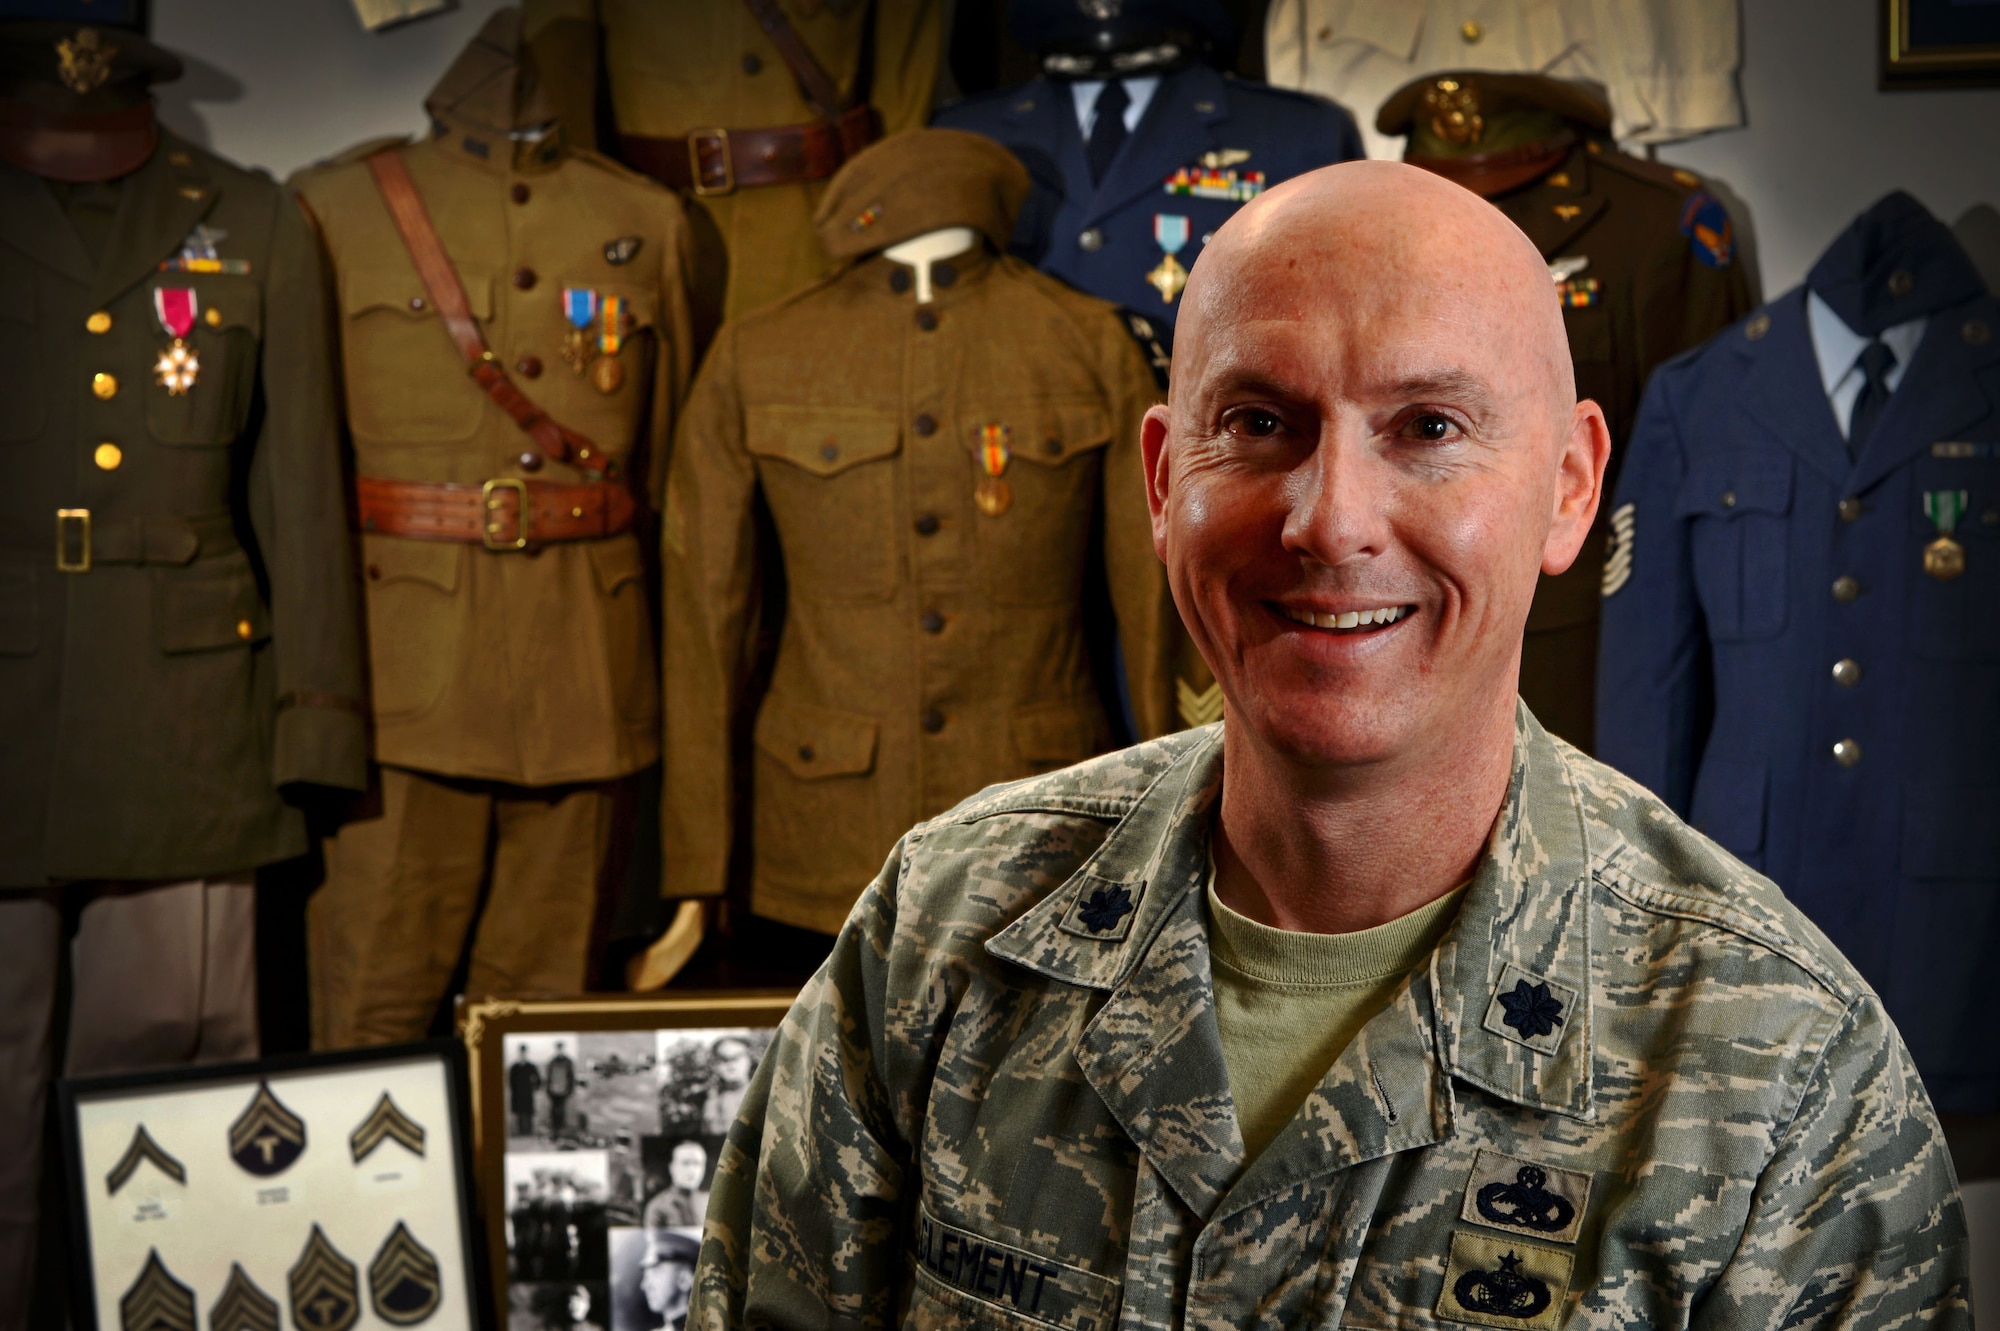 Lt. Col. Kyle Clement stands in front of his vintage U.S. military uniform collection Jan. 9, 2015 at Shaw Air Force Base, S.C.  Collecting for more than 20 years, Clement’s goal is to preserve Airman heritage by piecing together authentic uniforms dating back to 1914. Clement is the 20th Maintenance Group deputy commander.  (U.S. Air Force photo/Senior Airman Jensen Stidham)